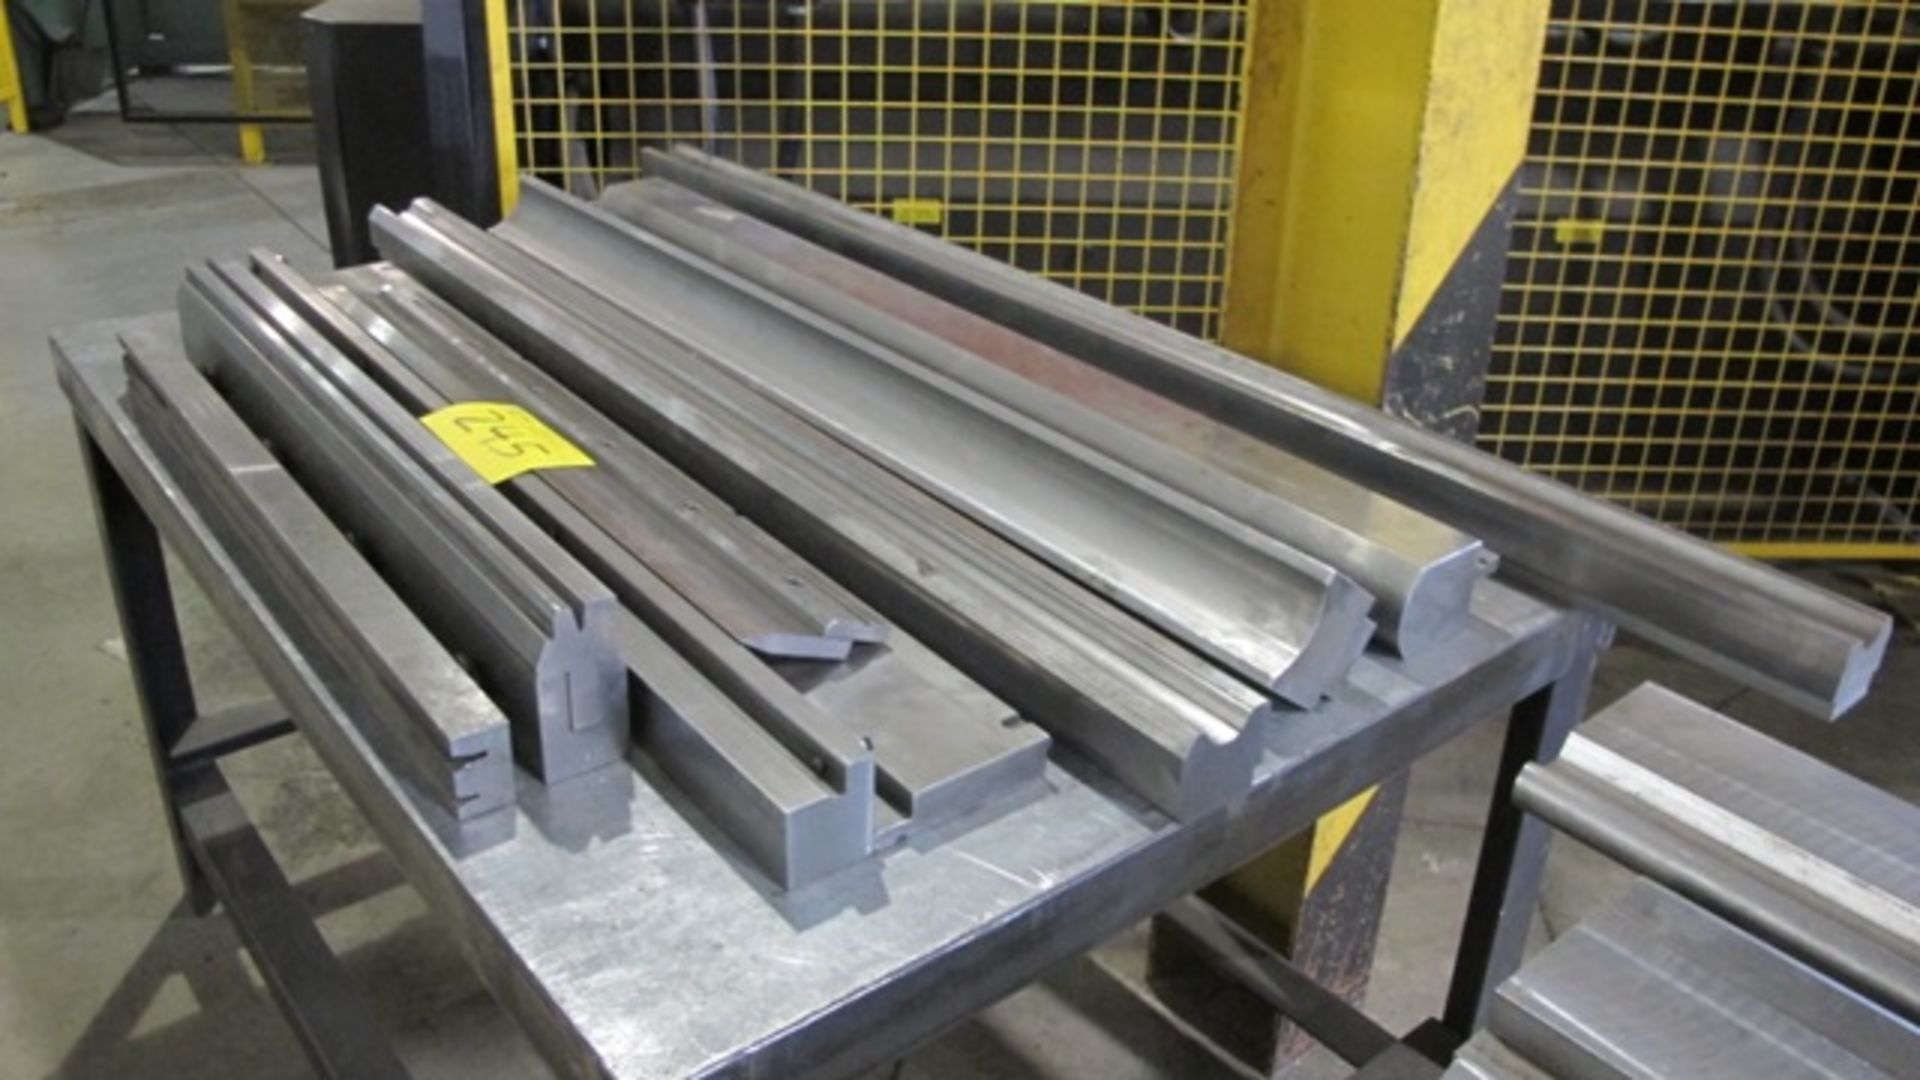 QUANTITY OF PRESS BRAKE DIES (UP TO 64"L) W/3 METAL TABLES - Image 2 of 4